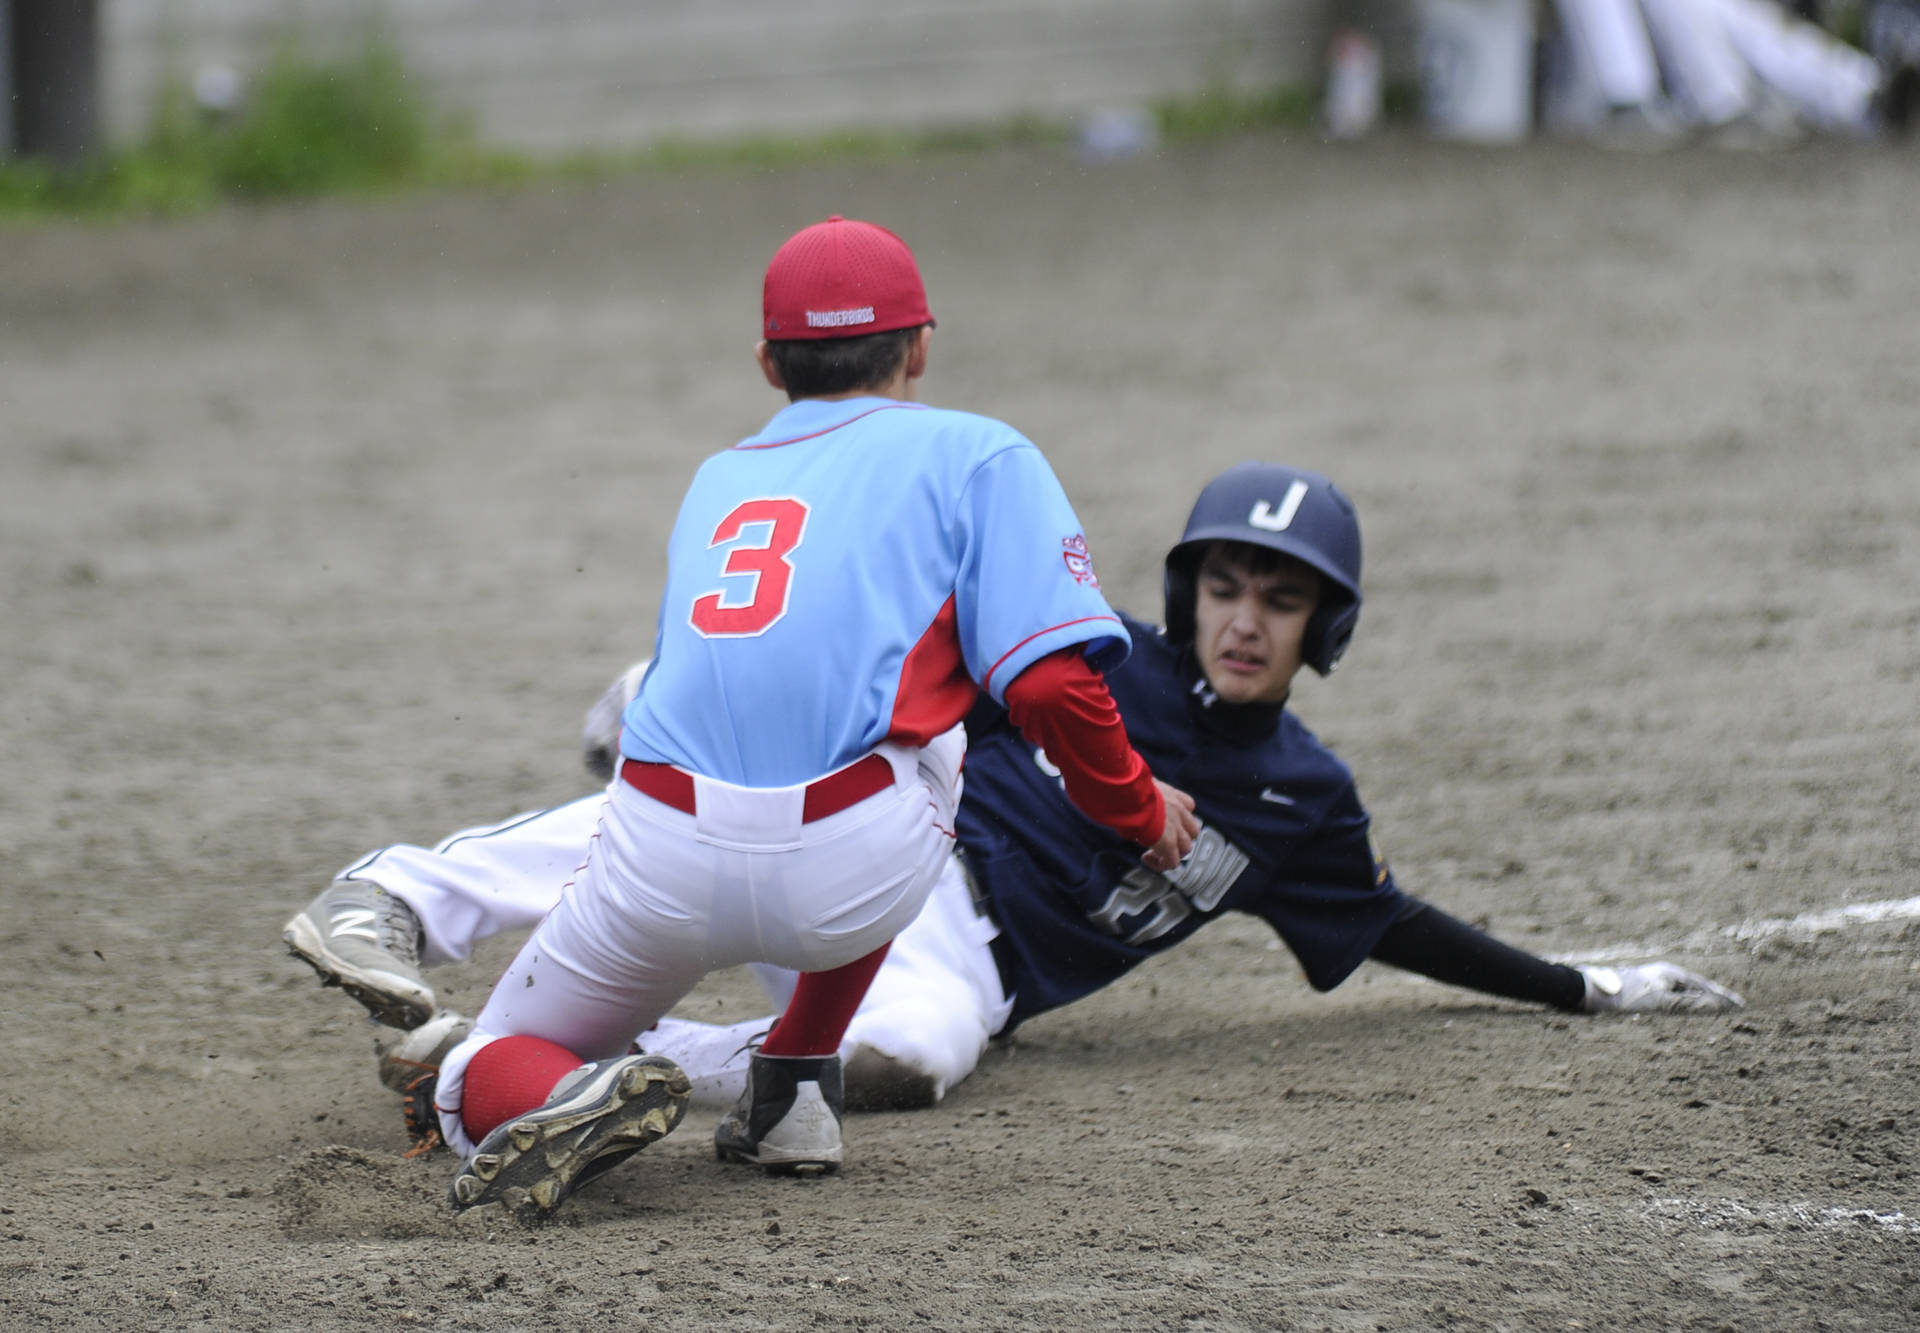 East Post 34 pitcher Ian Carle applies a tag on Juneau Post 25 outfielder Brennon Ludeman in the fifth inning at Adair-Kennedy Memorial Field on Saturday. Ludeman was safe on the play and Juneau won the game moments later on another play at home plate. (Nolin Ainsworth | Juneau Empire)